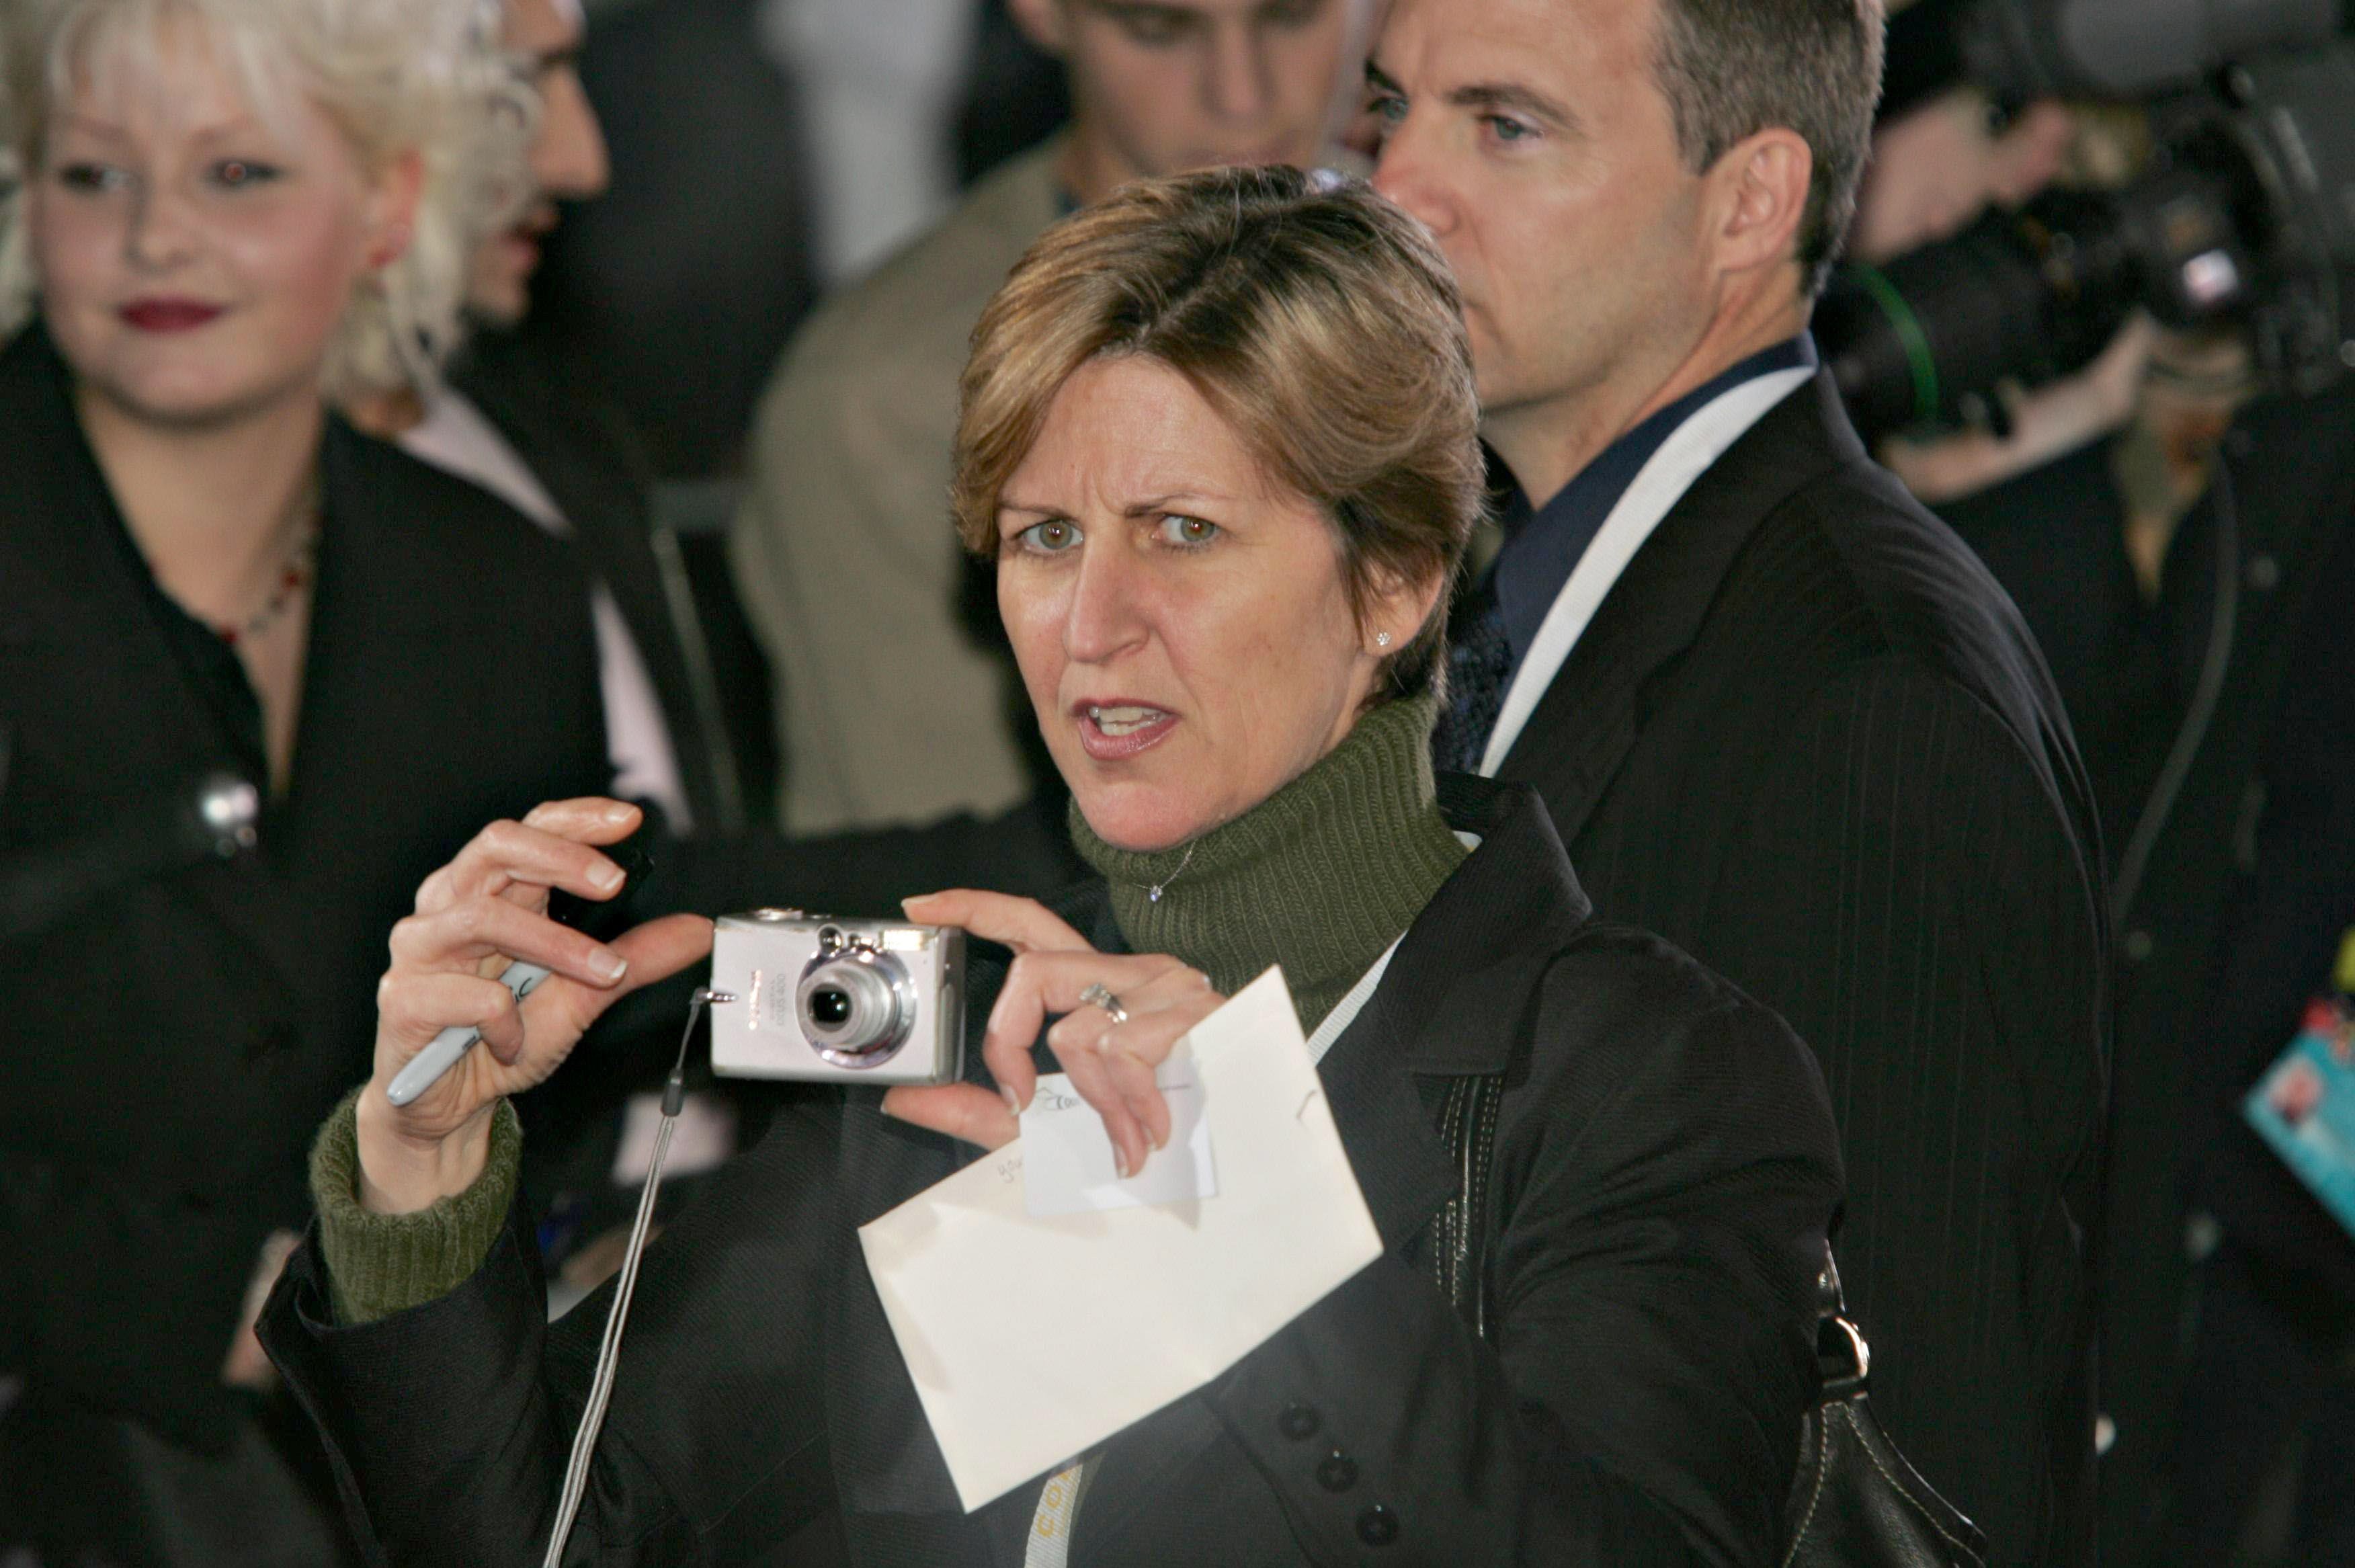 Lee Ann Mapother in Berlin on September 01, 2004. | Source: Getty Images